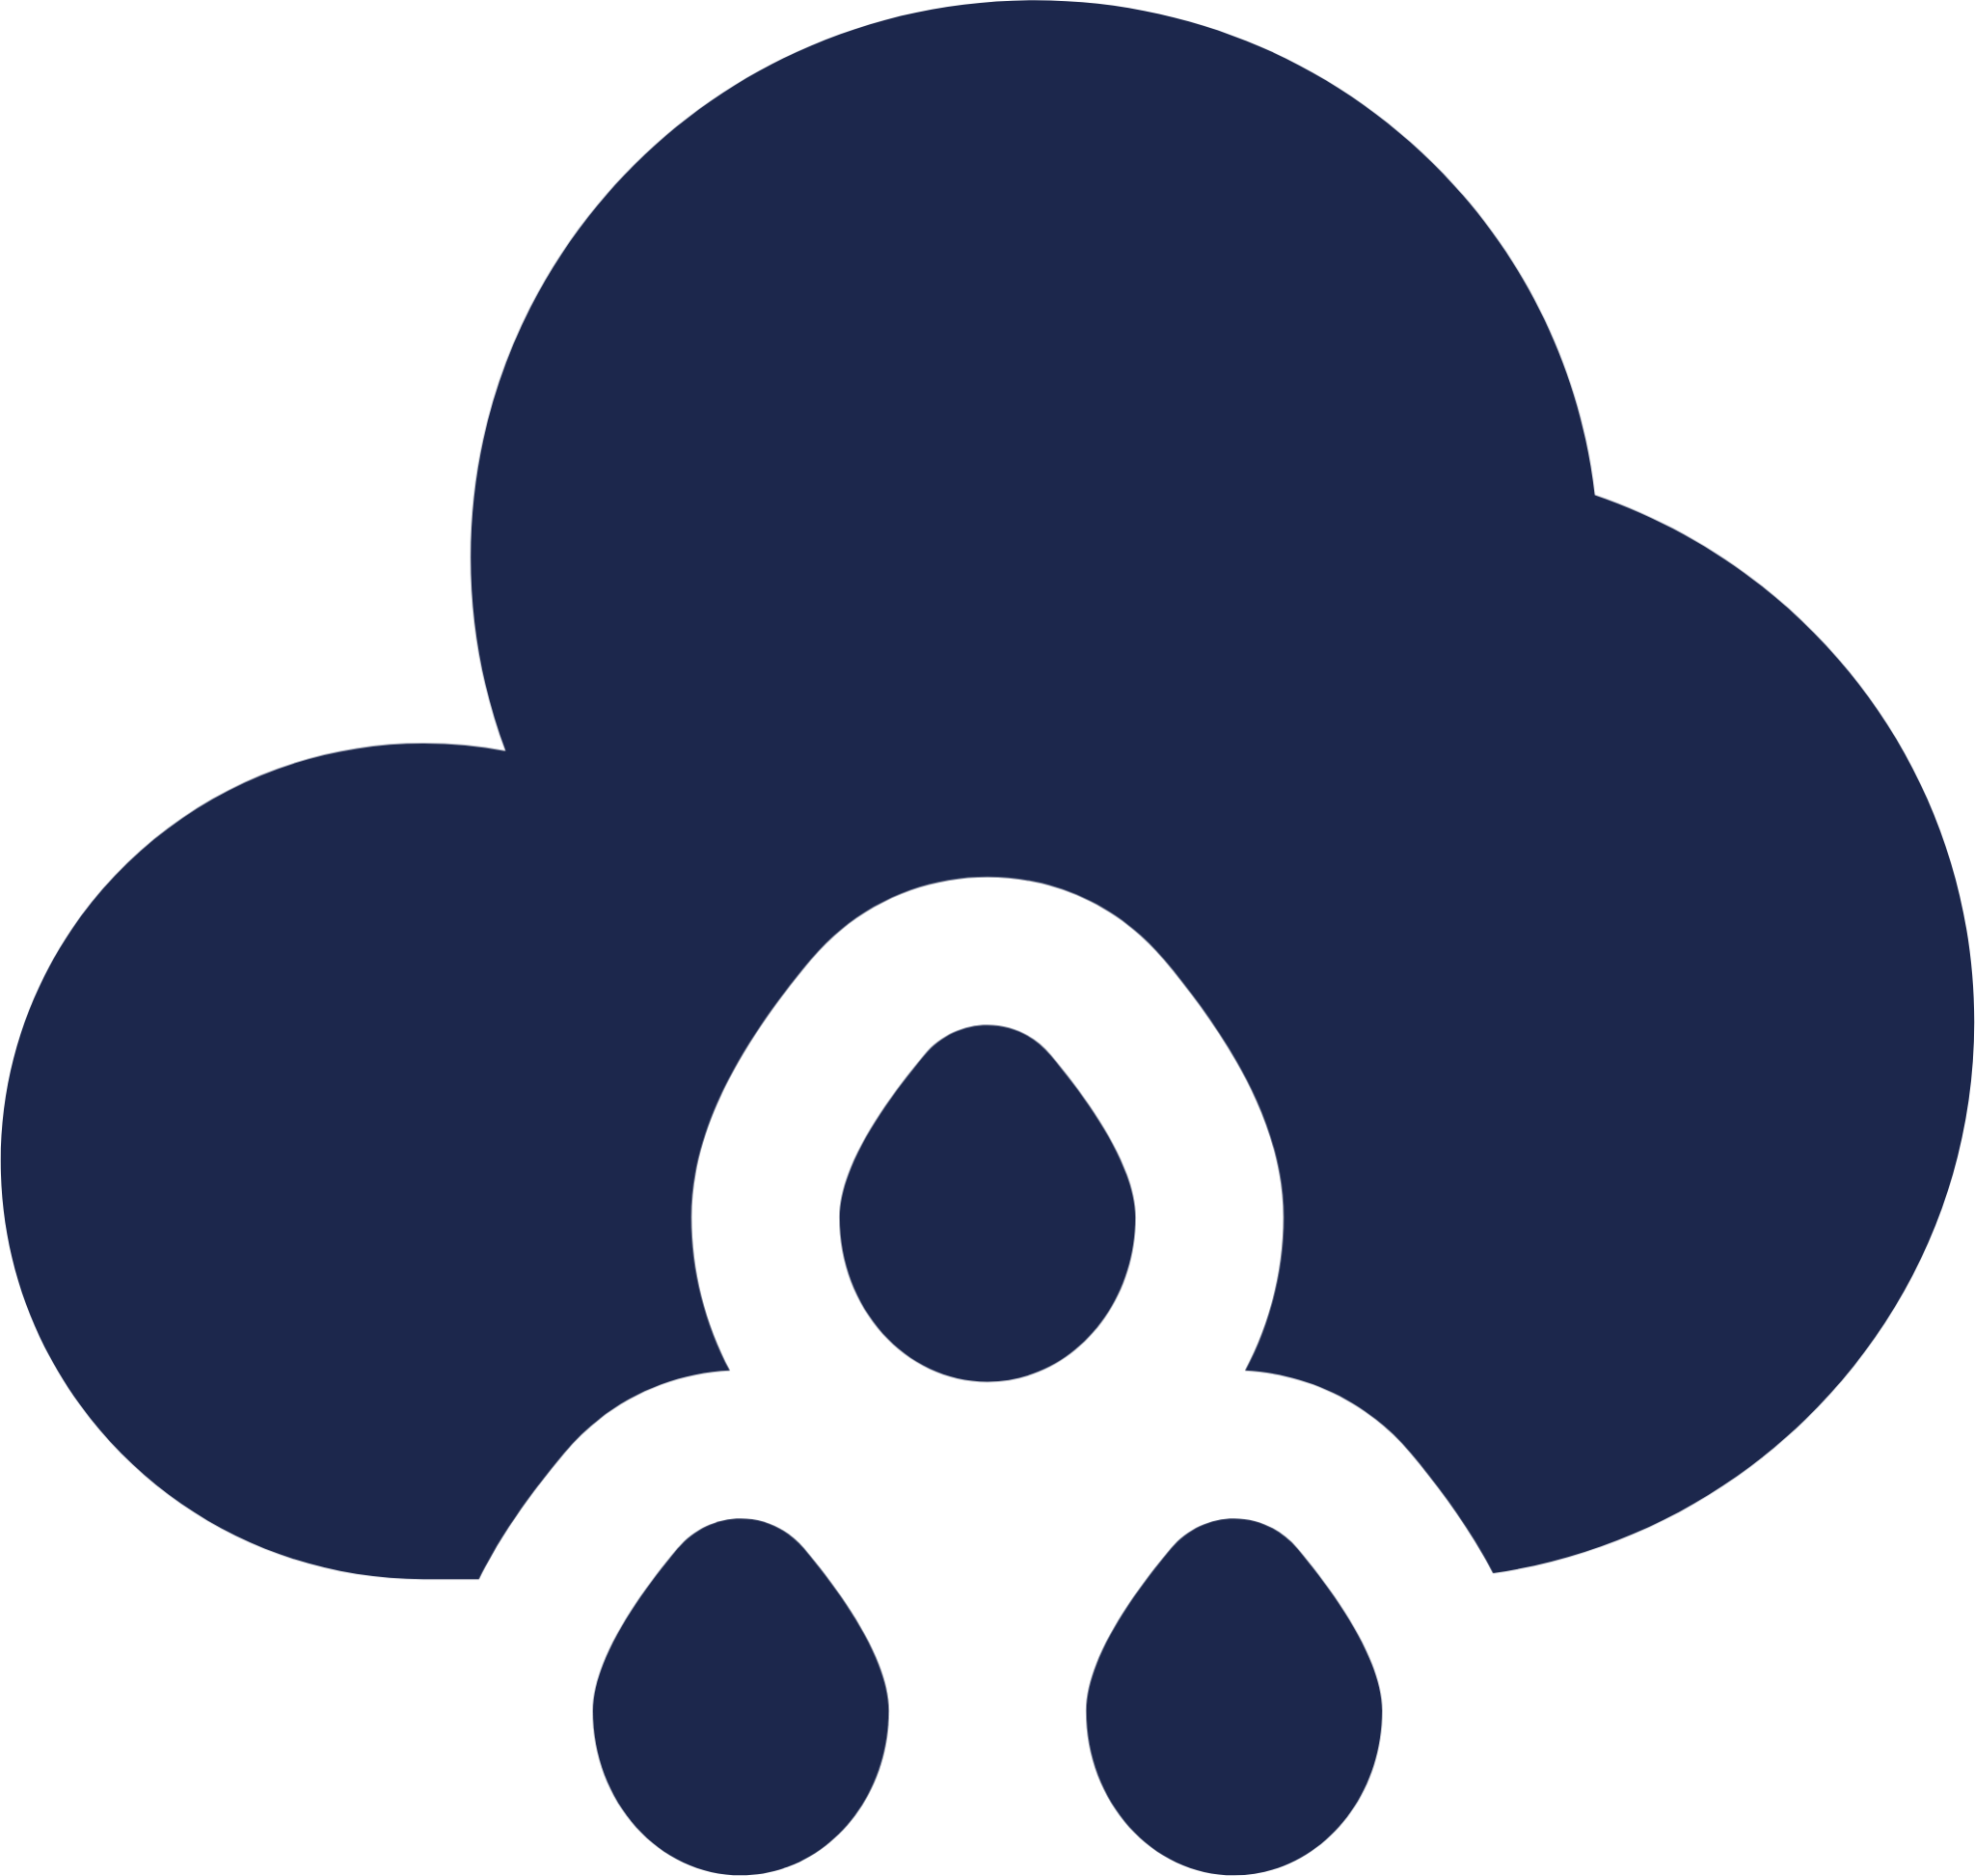 Cloud Waterdrops icon